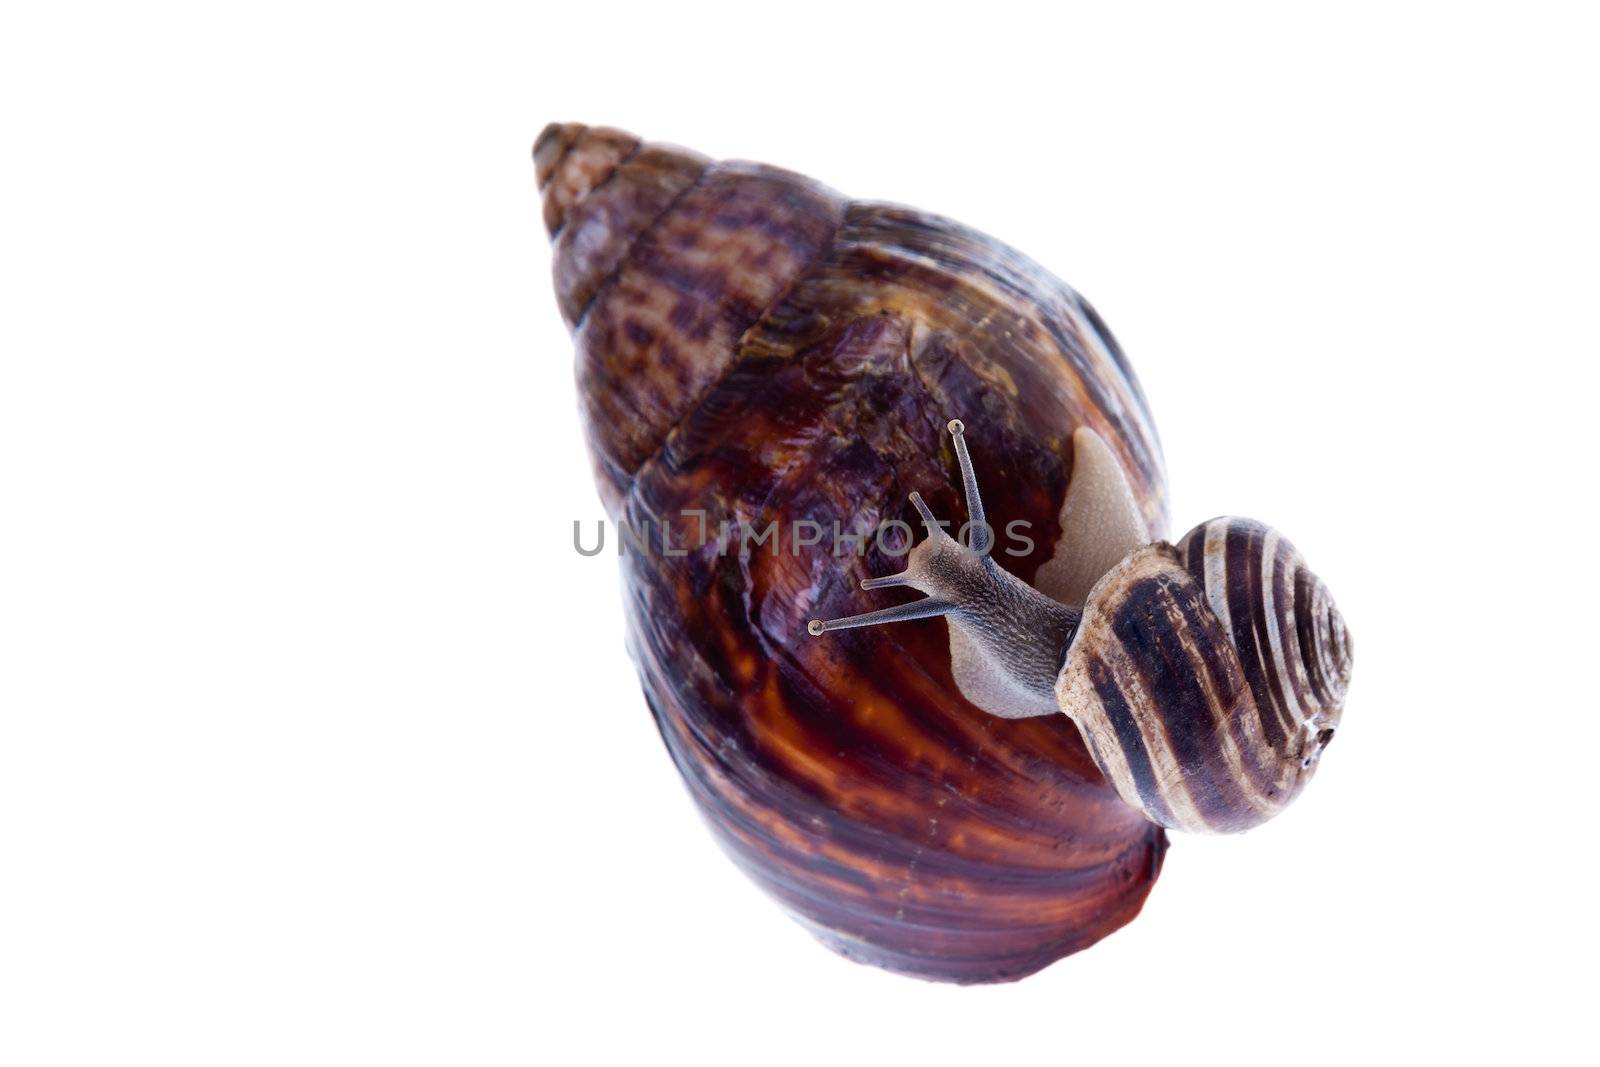 A small snail crawling on a much bigger snail